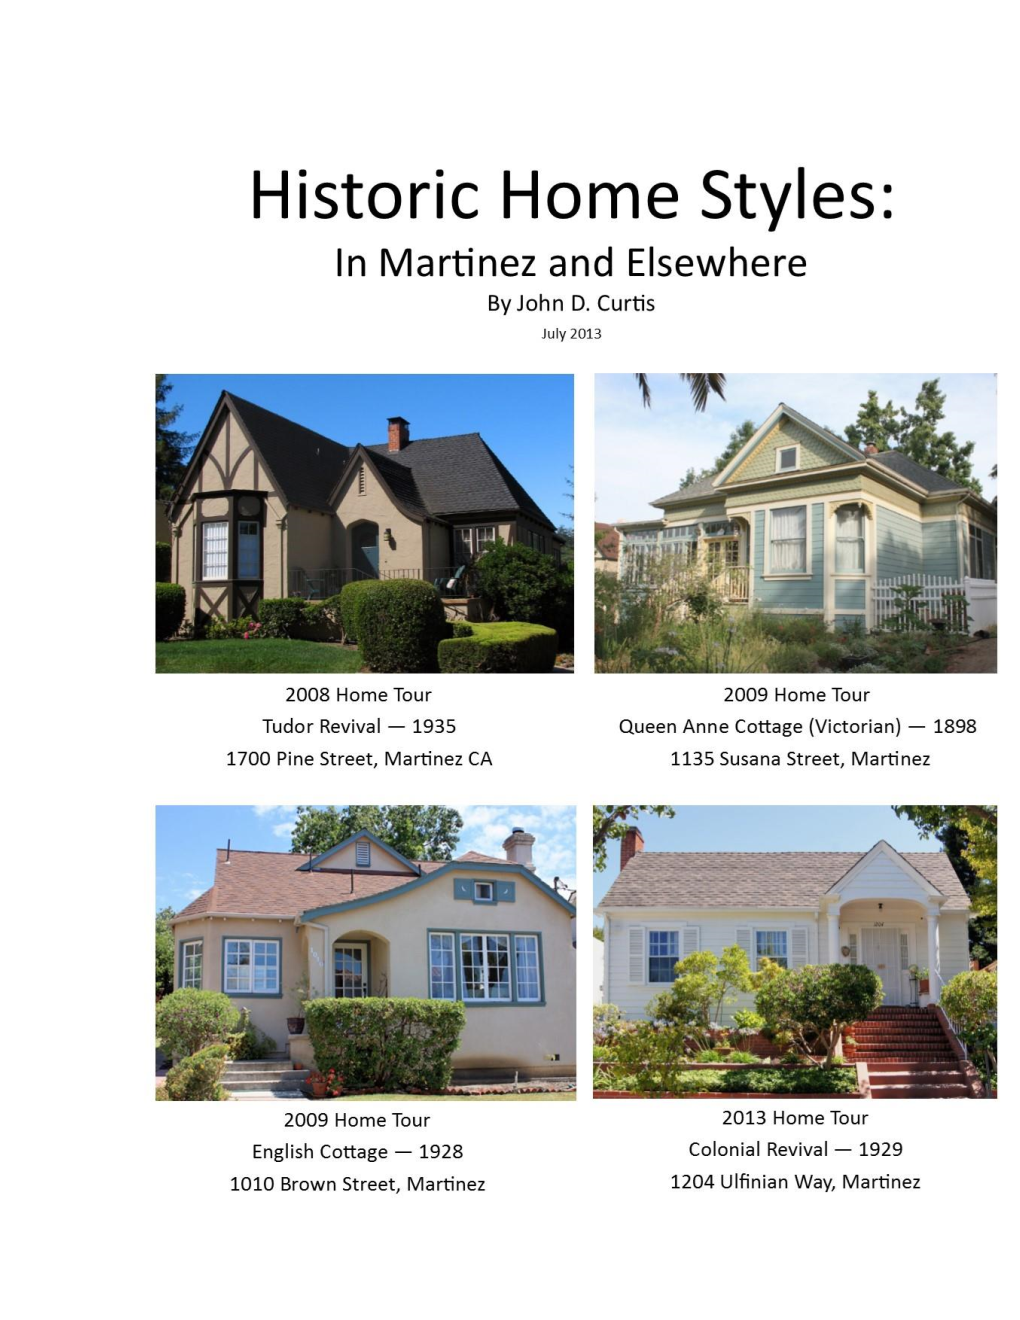 Tudor Revival Style — 1890 to 1940  English Cottage Style — 1920 to 1940  Storybook Style — 1920 to 1930S